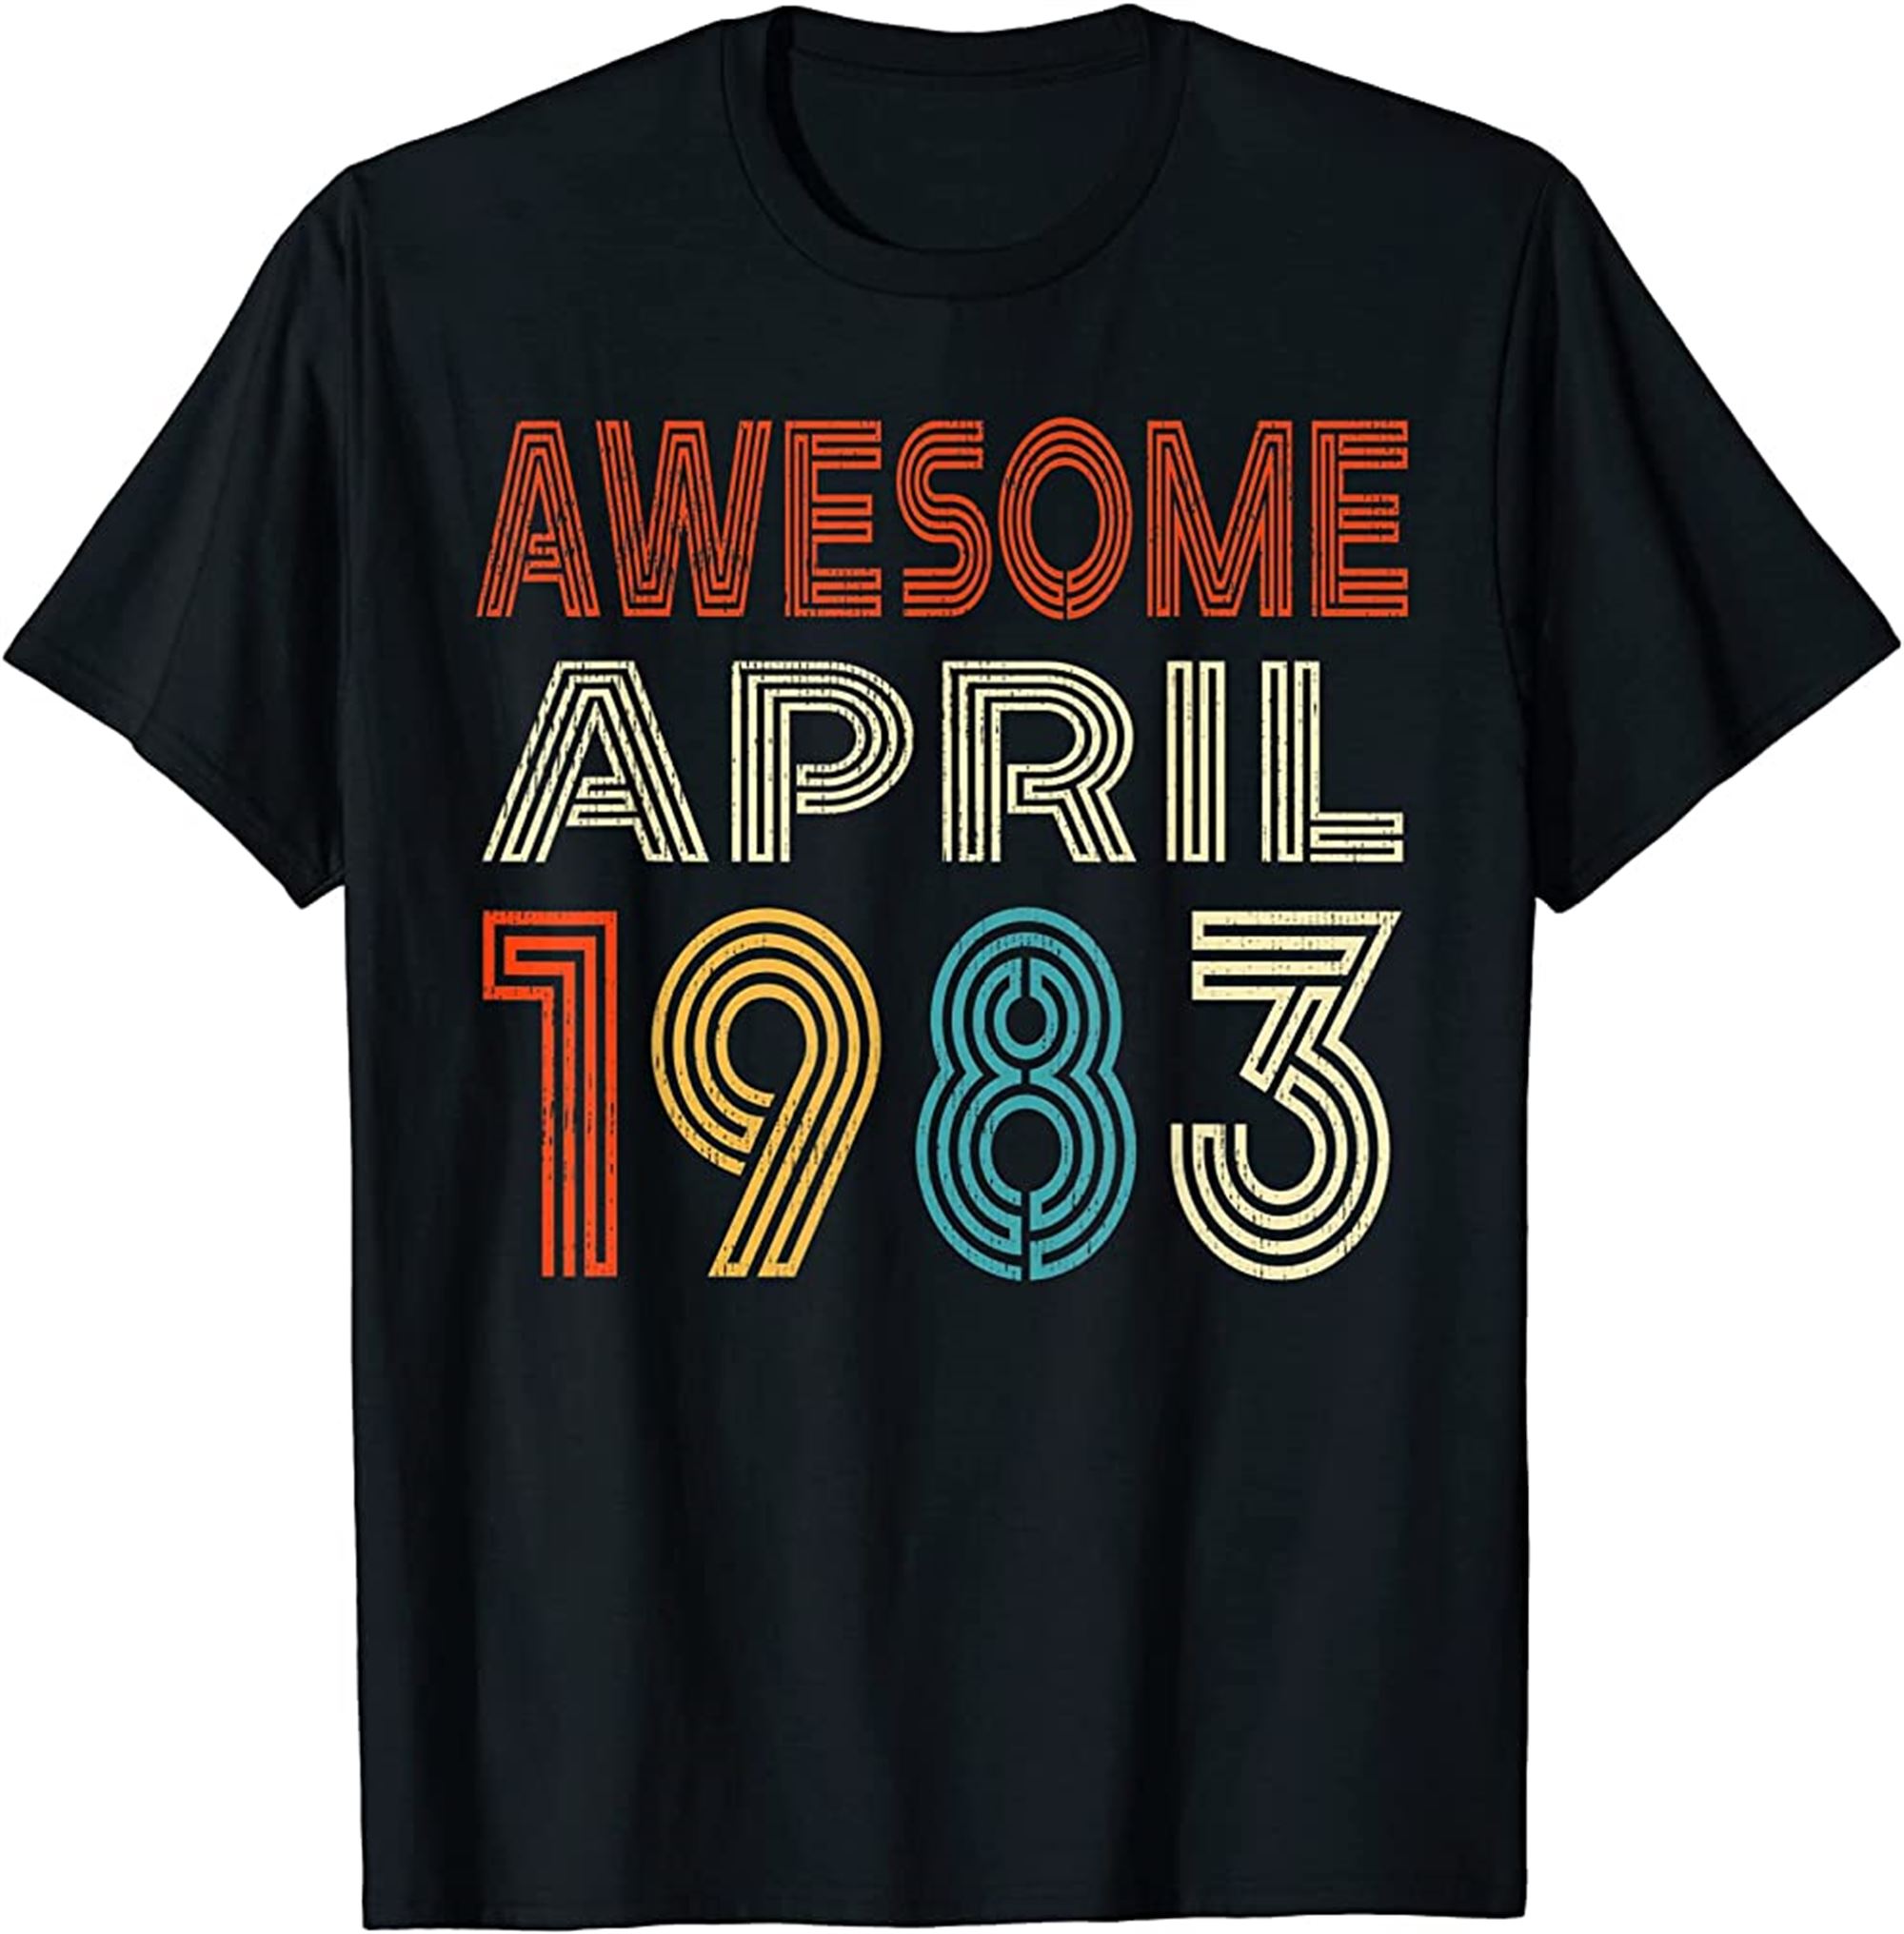 39th Birthday Vintage 39 Years Awesome April Since 1983 T-shirt Size Up To 5xl